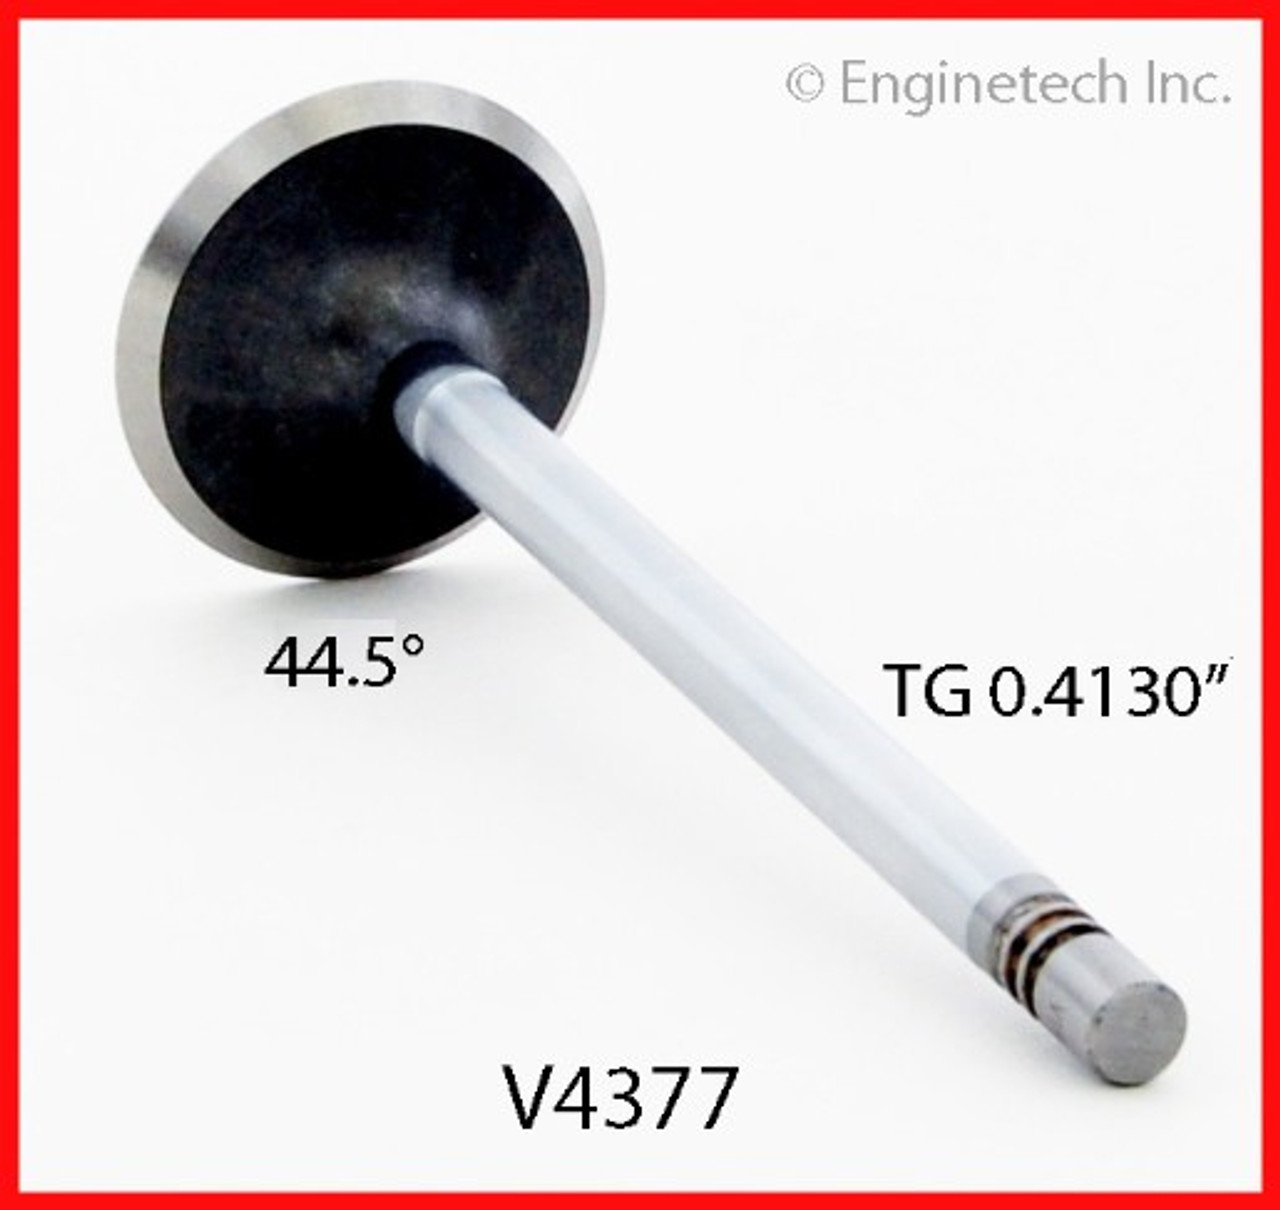 Exhaust Valve - 2006 Ford Mustang 4.6L (V4377.B19)